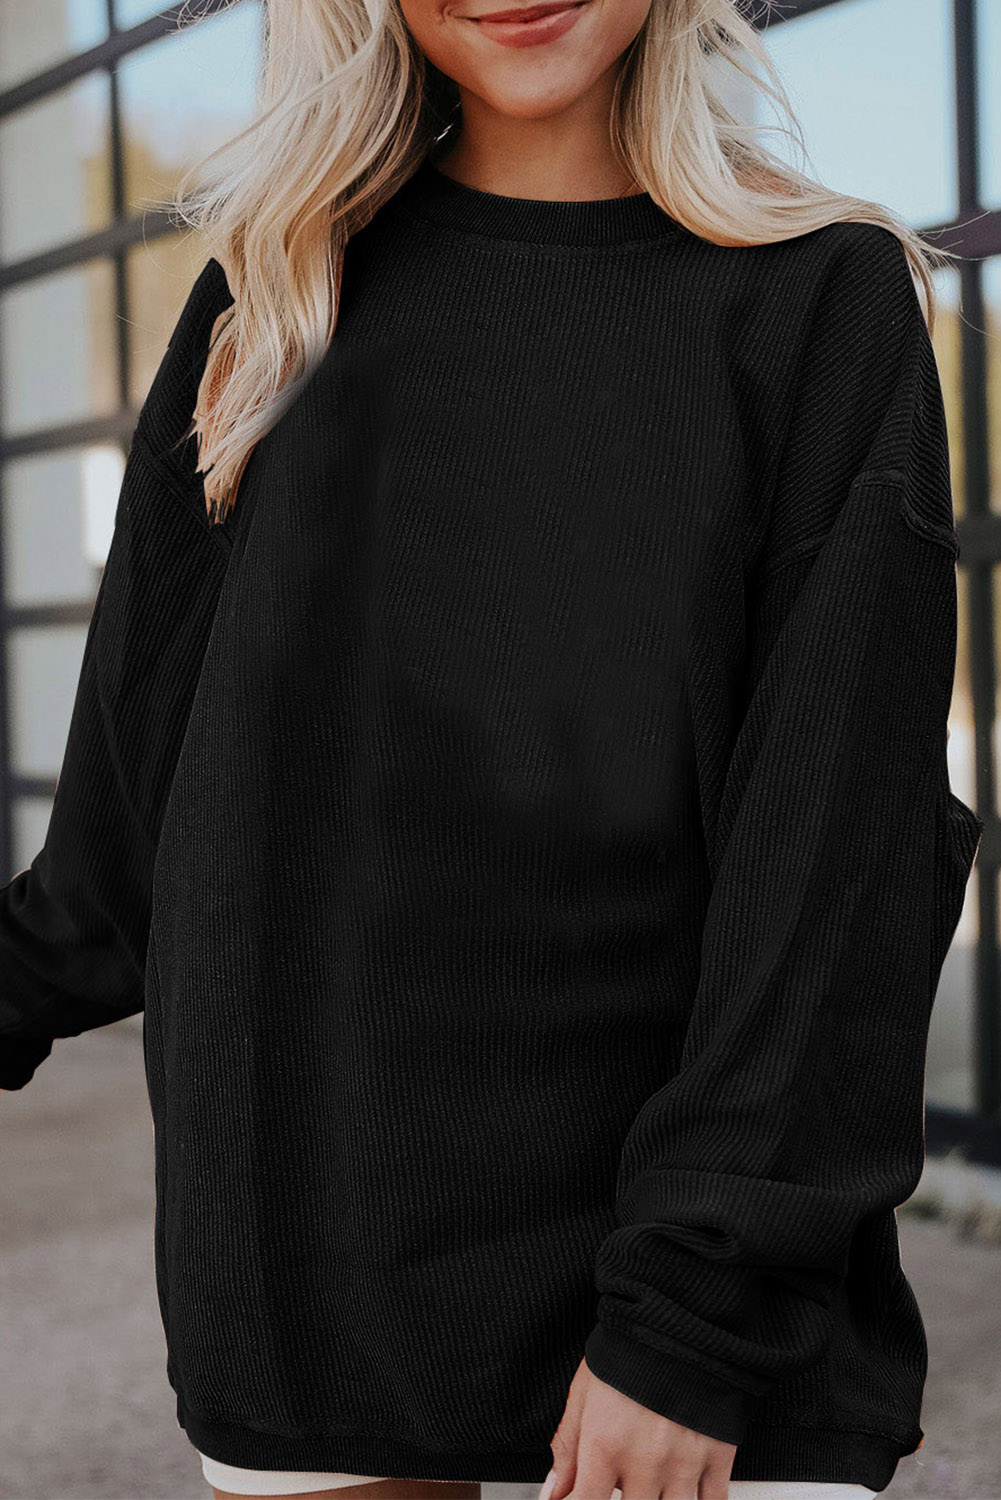 Shewin Wholesale Cheap Black Solid Color Ribbed Oversized Sweatshirt